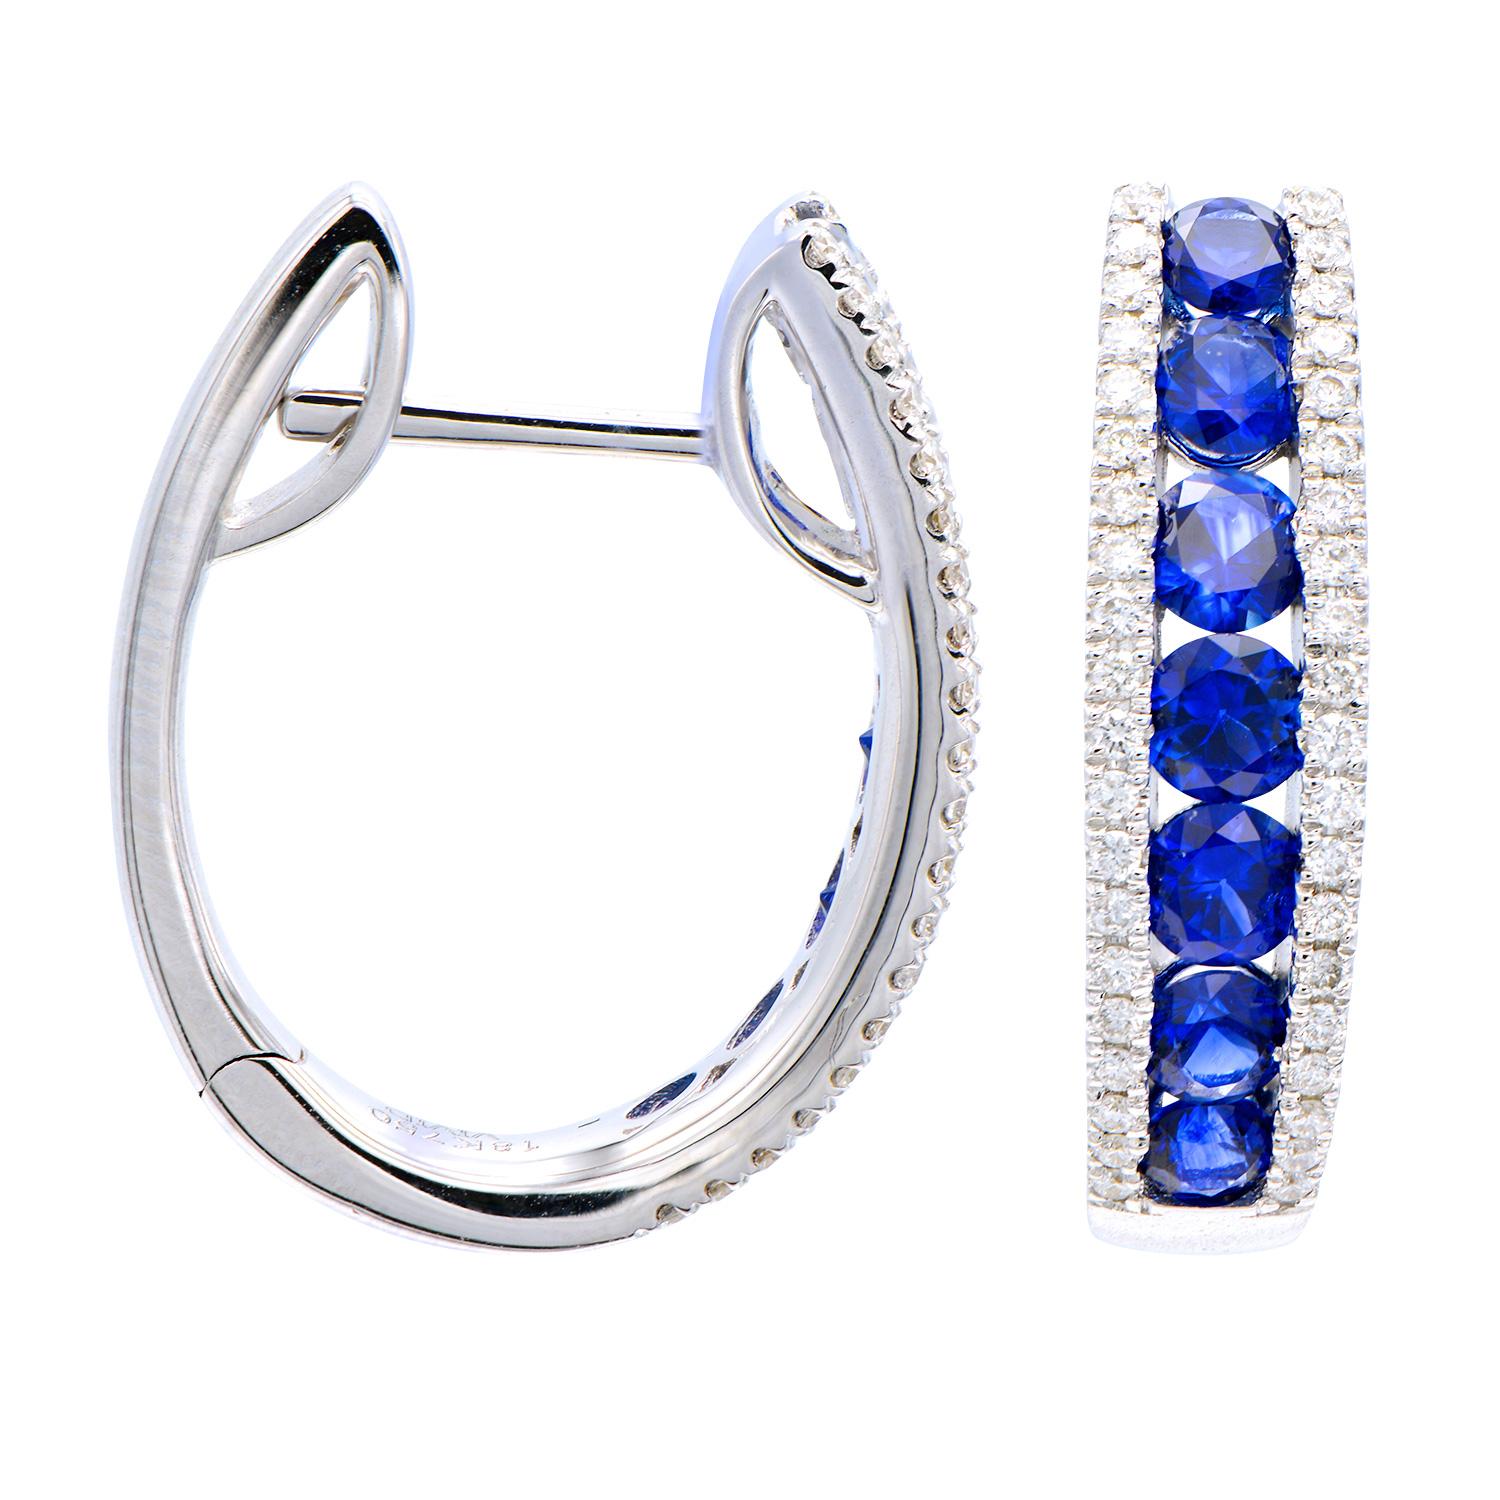 These beautiful Sapphire and Diamond hoops are a classic staple and a change from regular diamonds. These earrings contain 14 royal blue sapphires totaling 1.59 carats and are surrounded by 80 round VS2, G color diamonds totaling 0.28 carats. The